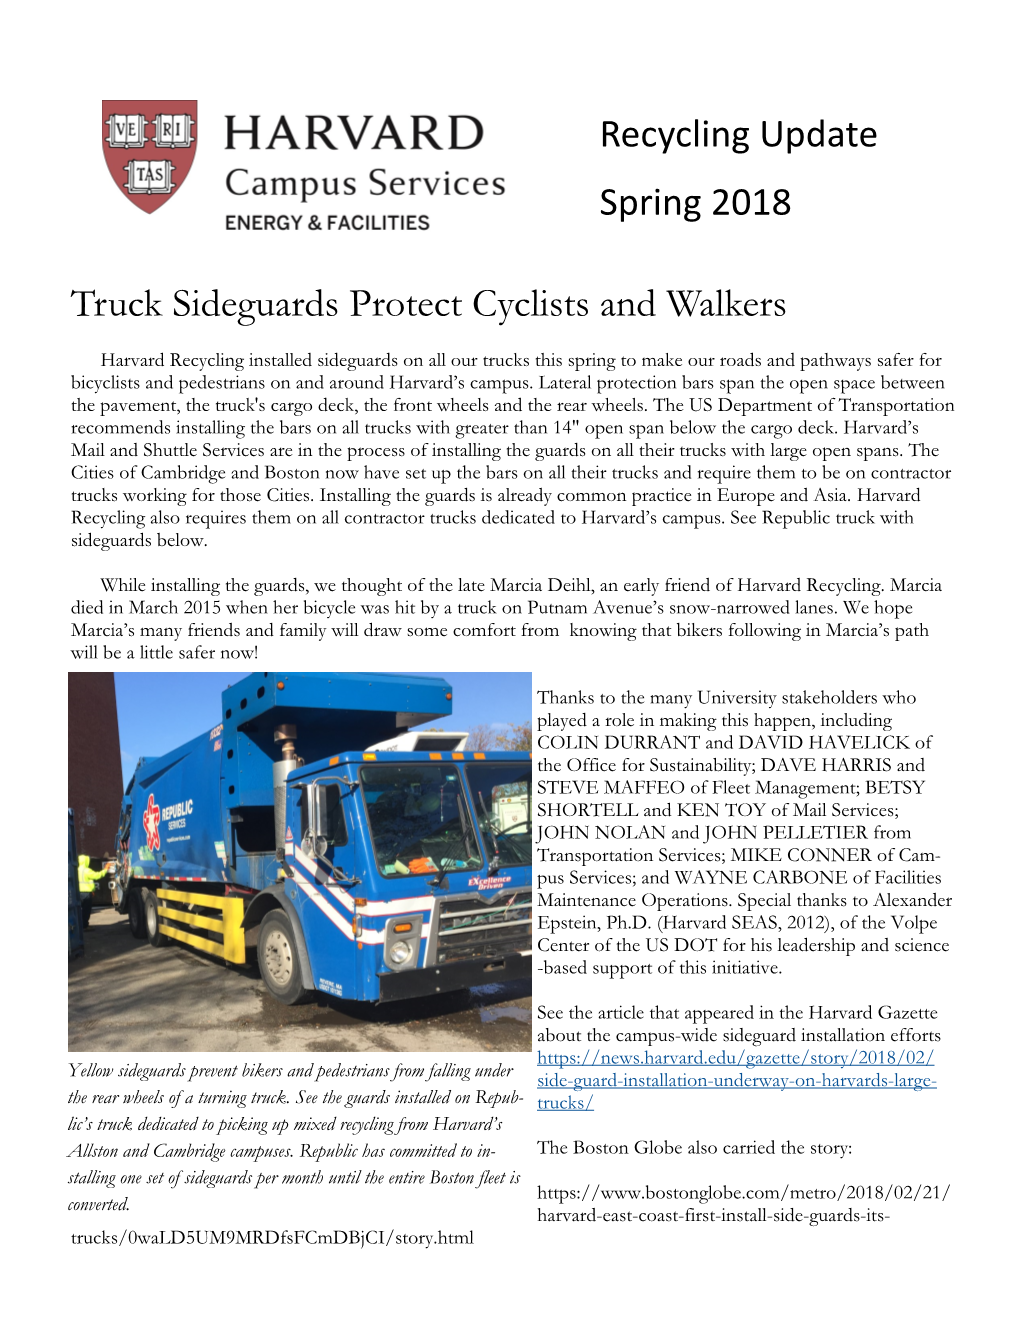 Truck Sideguards Protect Cyclists and Walkers Recycling Update Spring